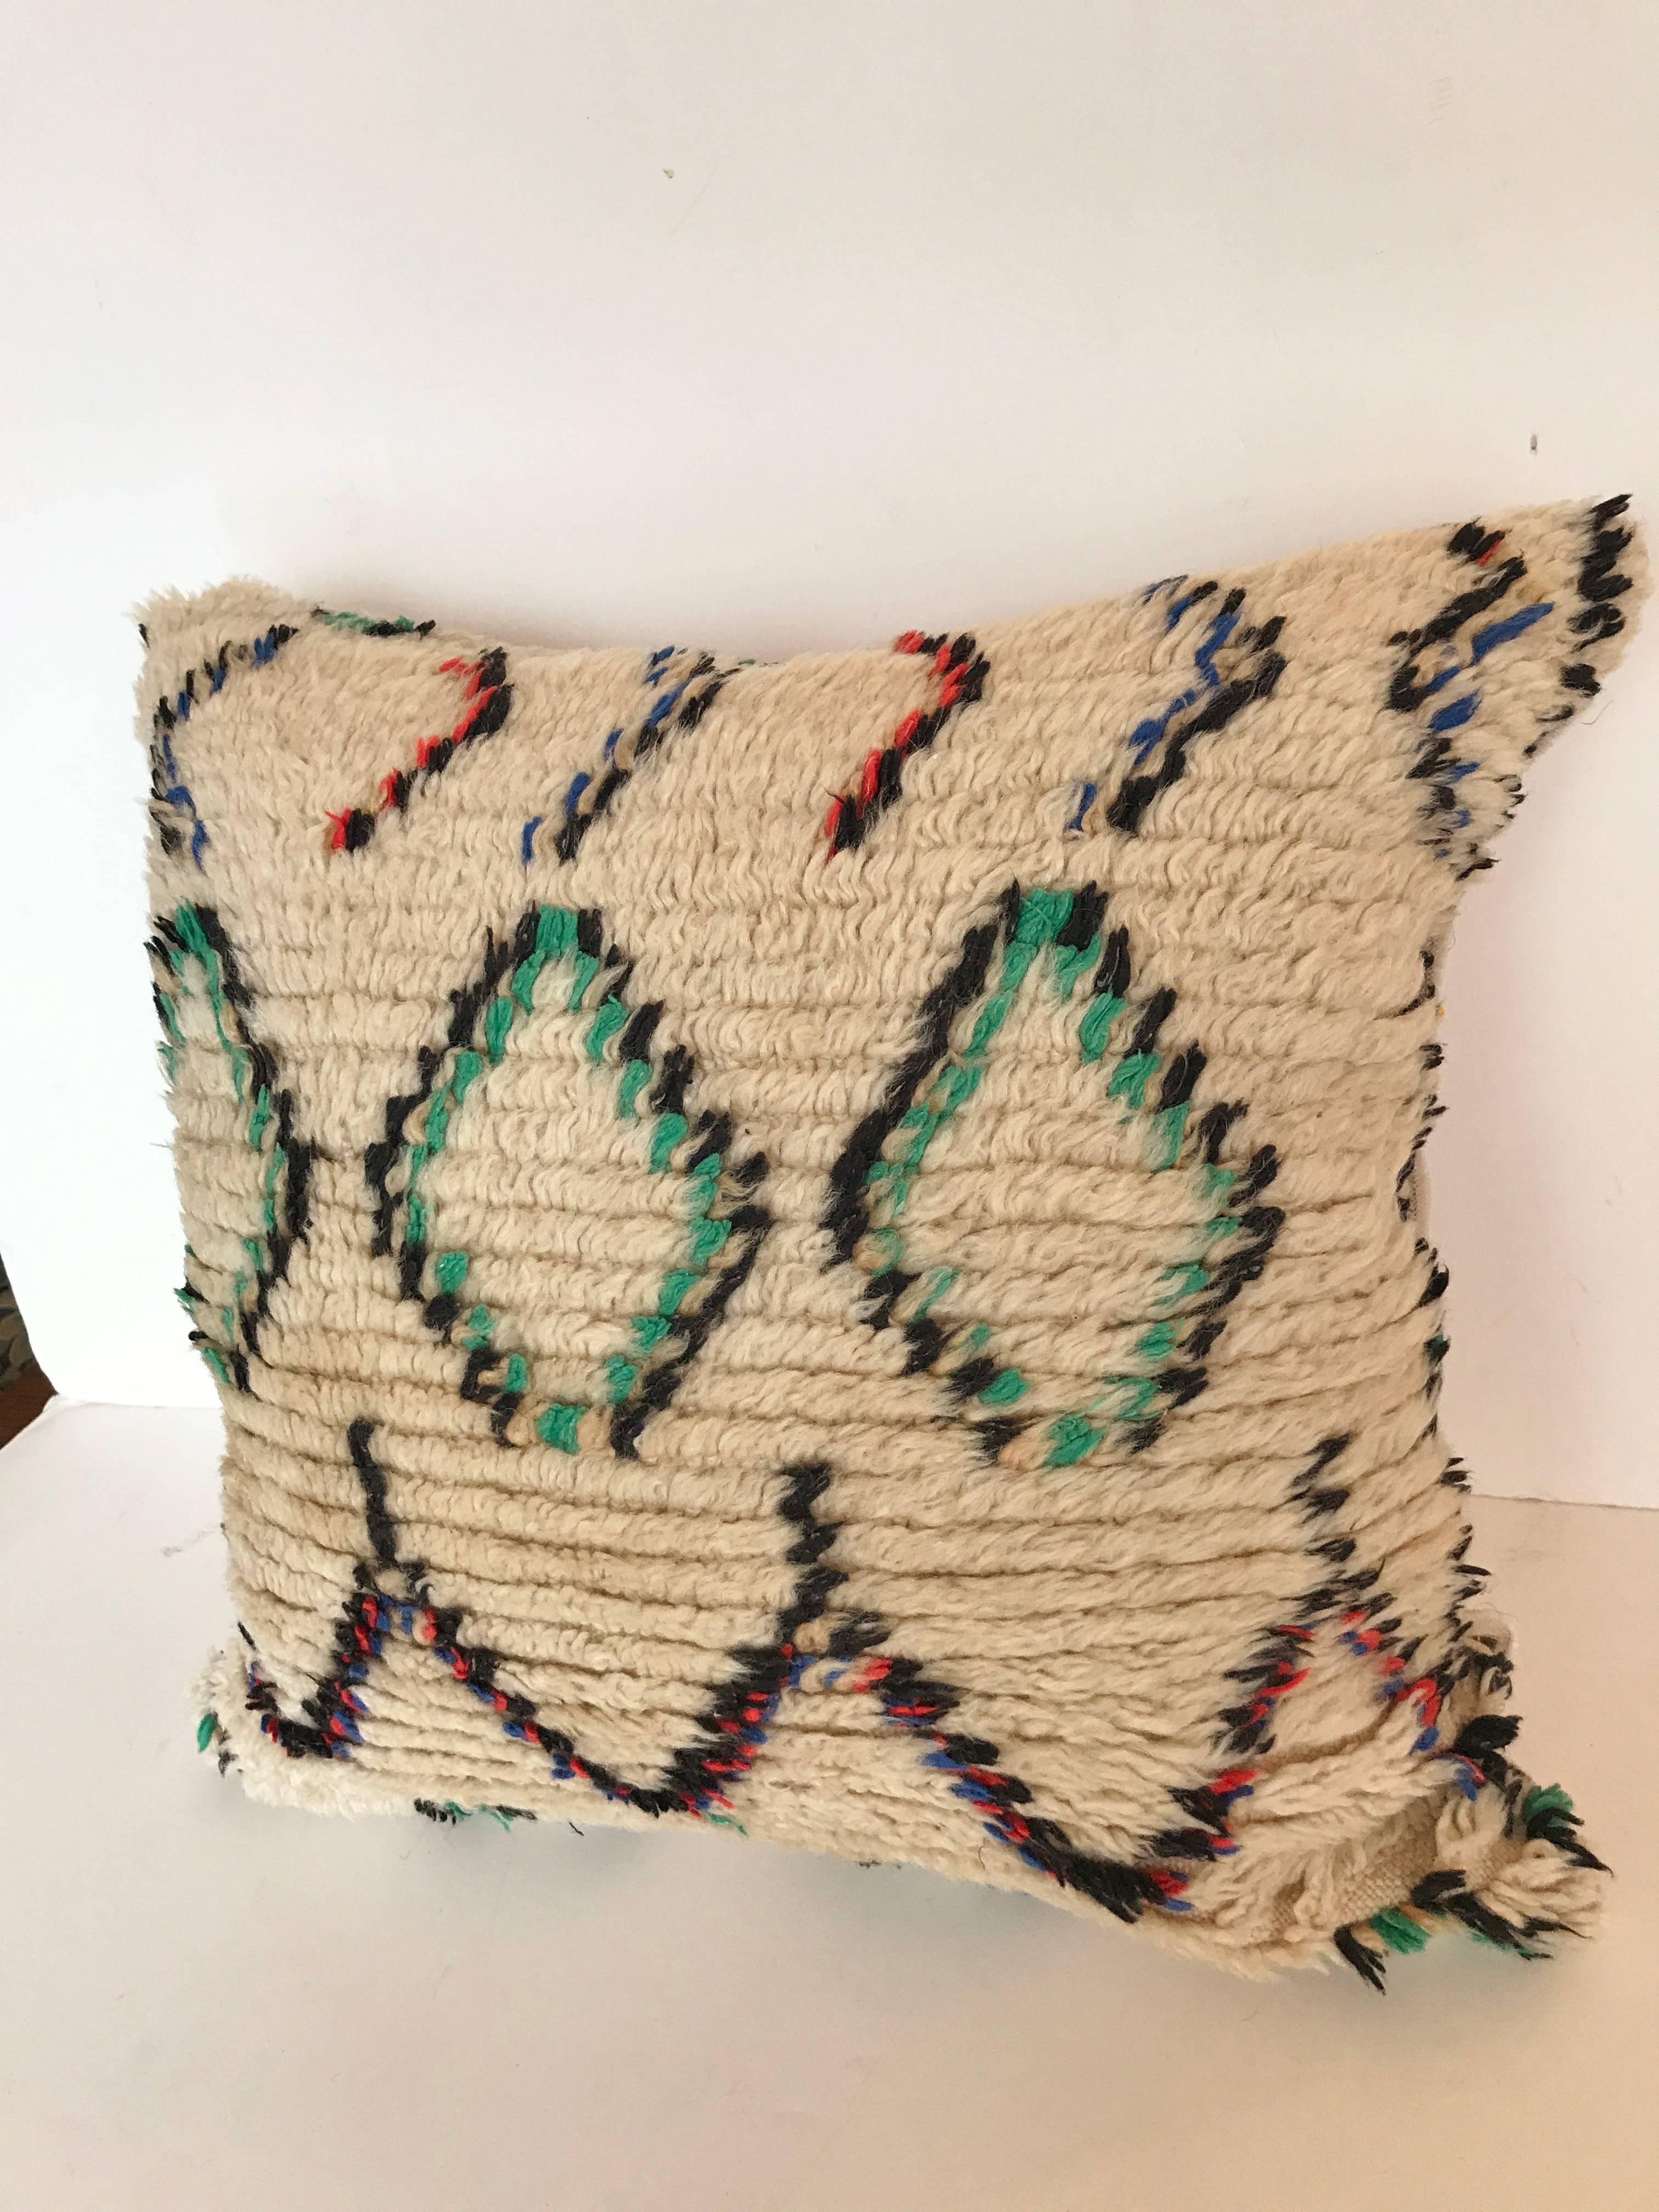 Custom Pillow cut from a vintage Moroccan Beni Ouarain hand loomed wool Berber rug from the Atlas Mountains.  Wool is soft and lustrous with all natural dyes.  Pillow is backed in mohair, filled with an insert of 50/50 down and feathers and hand